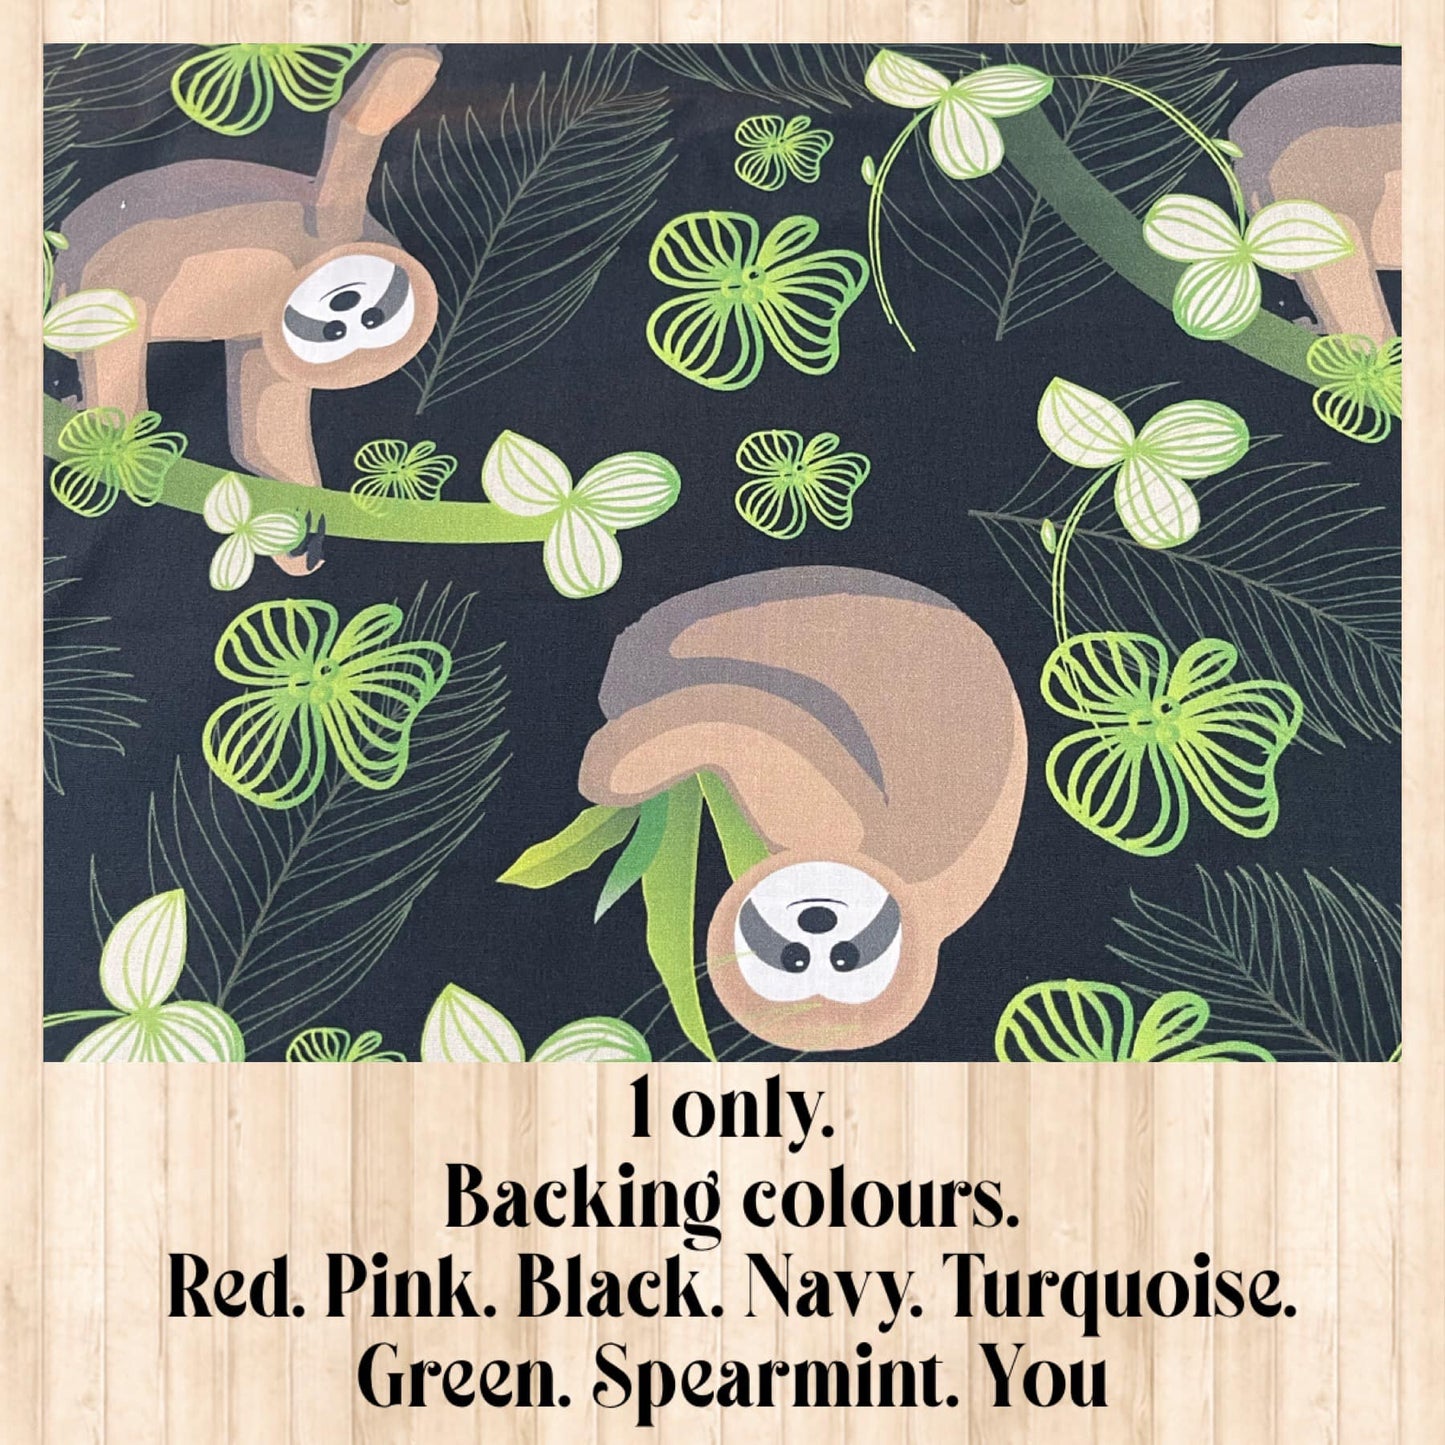 Clearance Swag Blanket - Sloth's